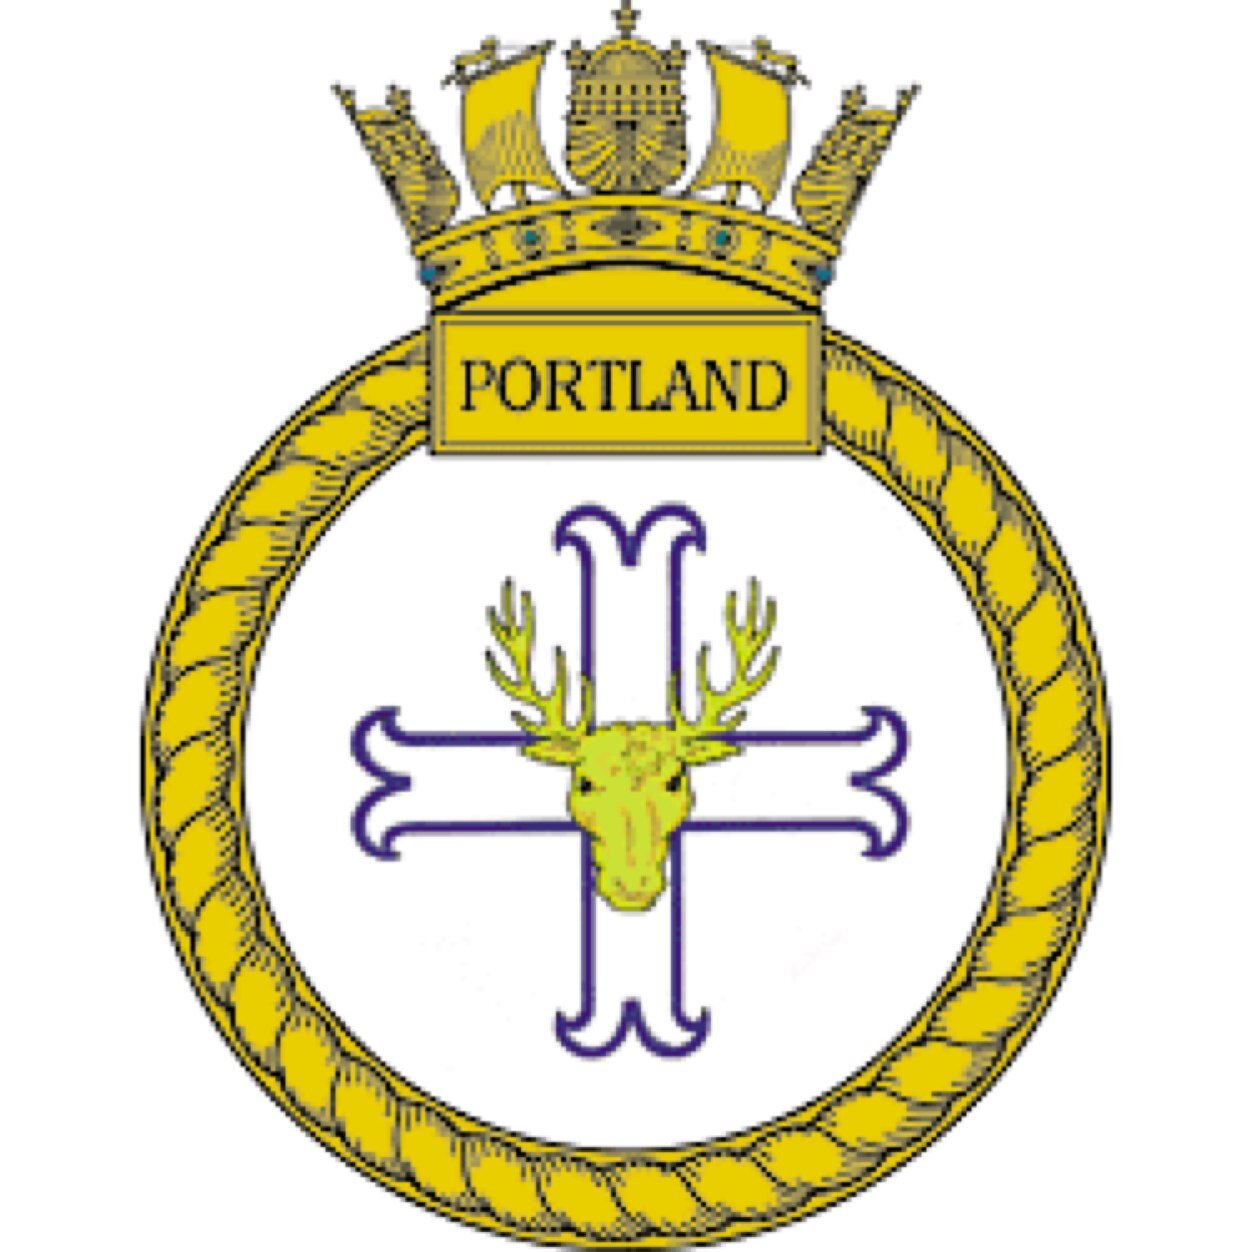 The official X account for HMS Portland